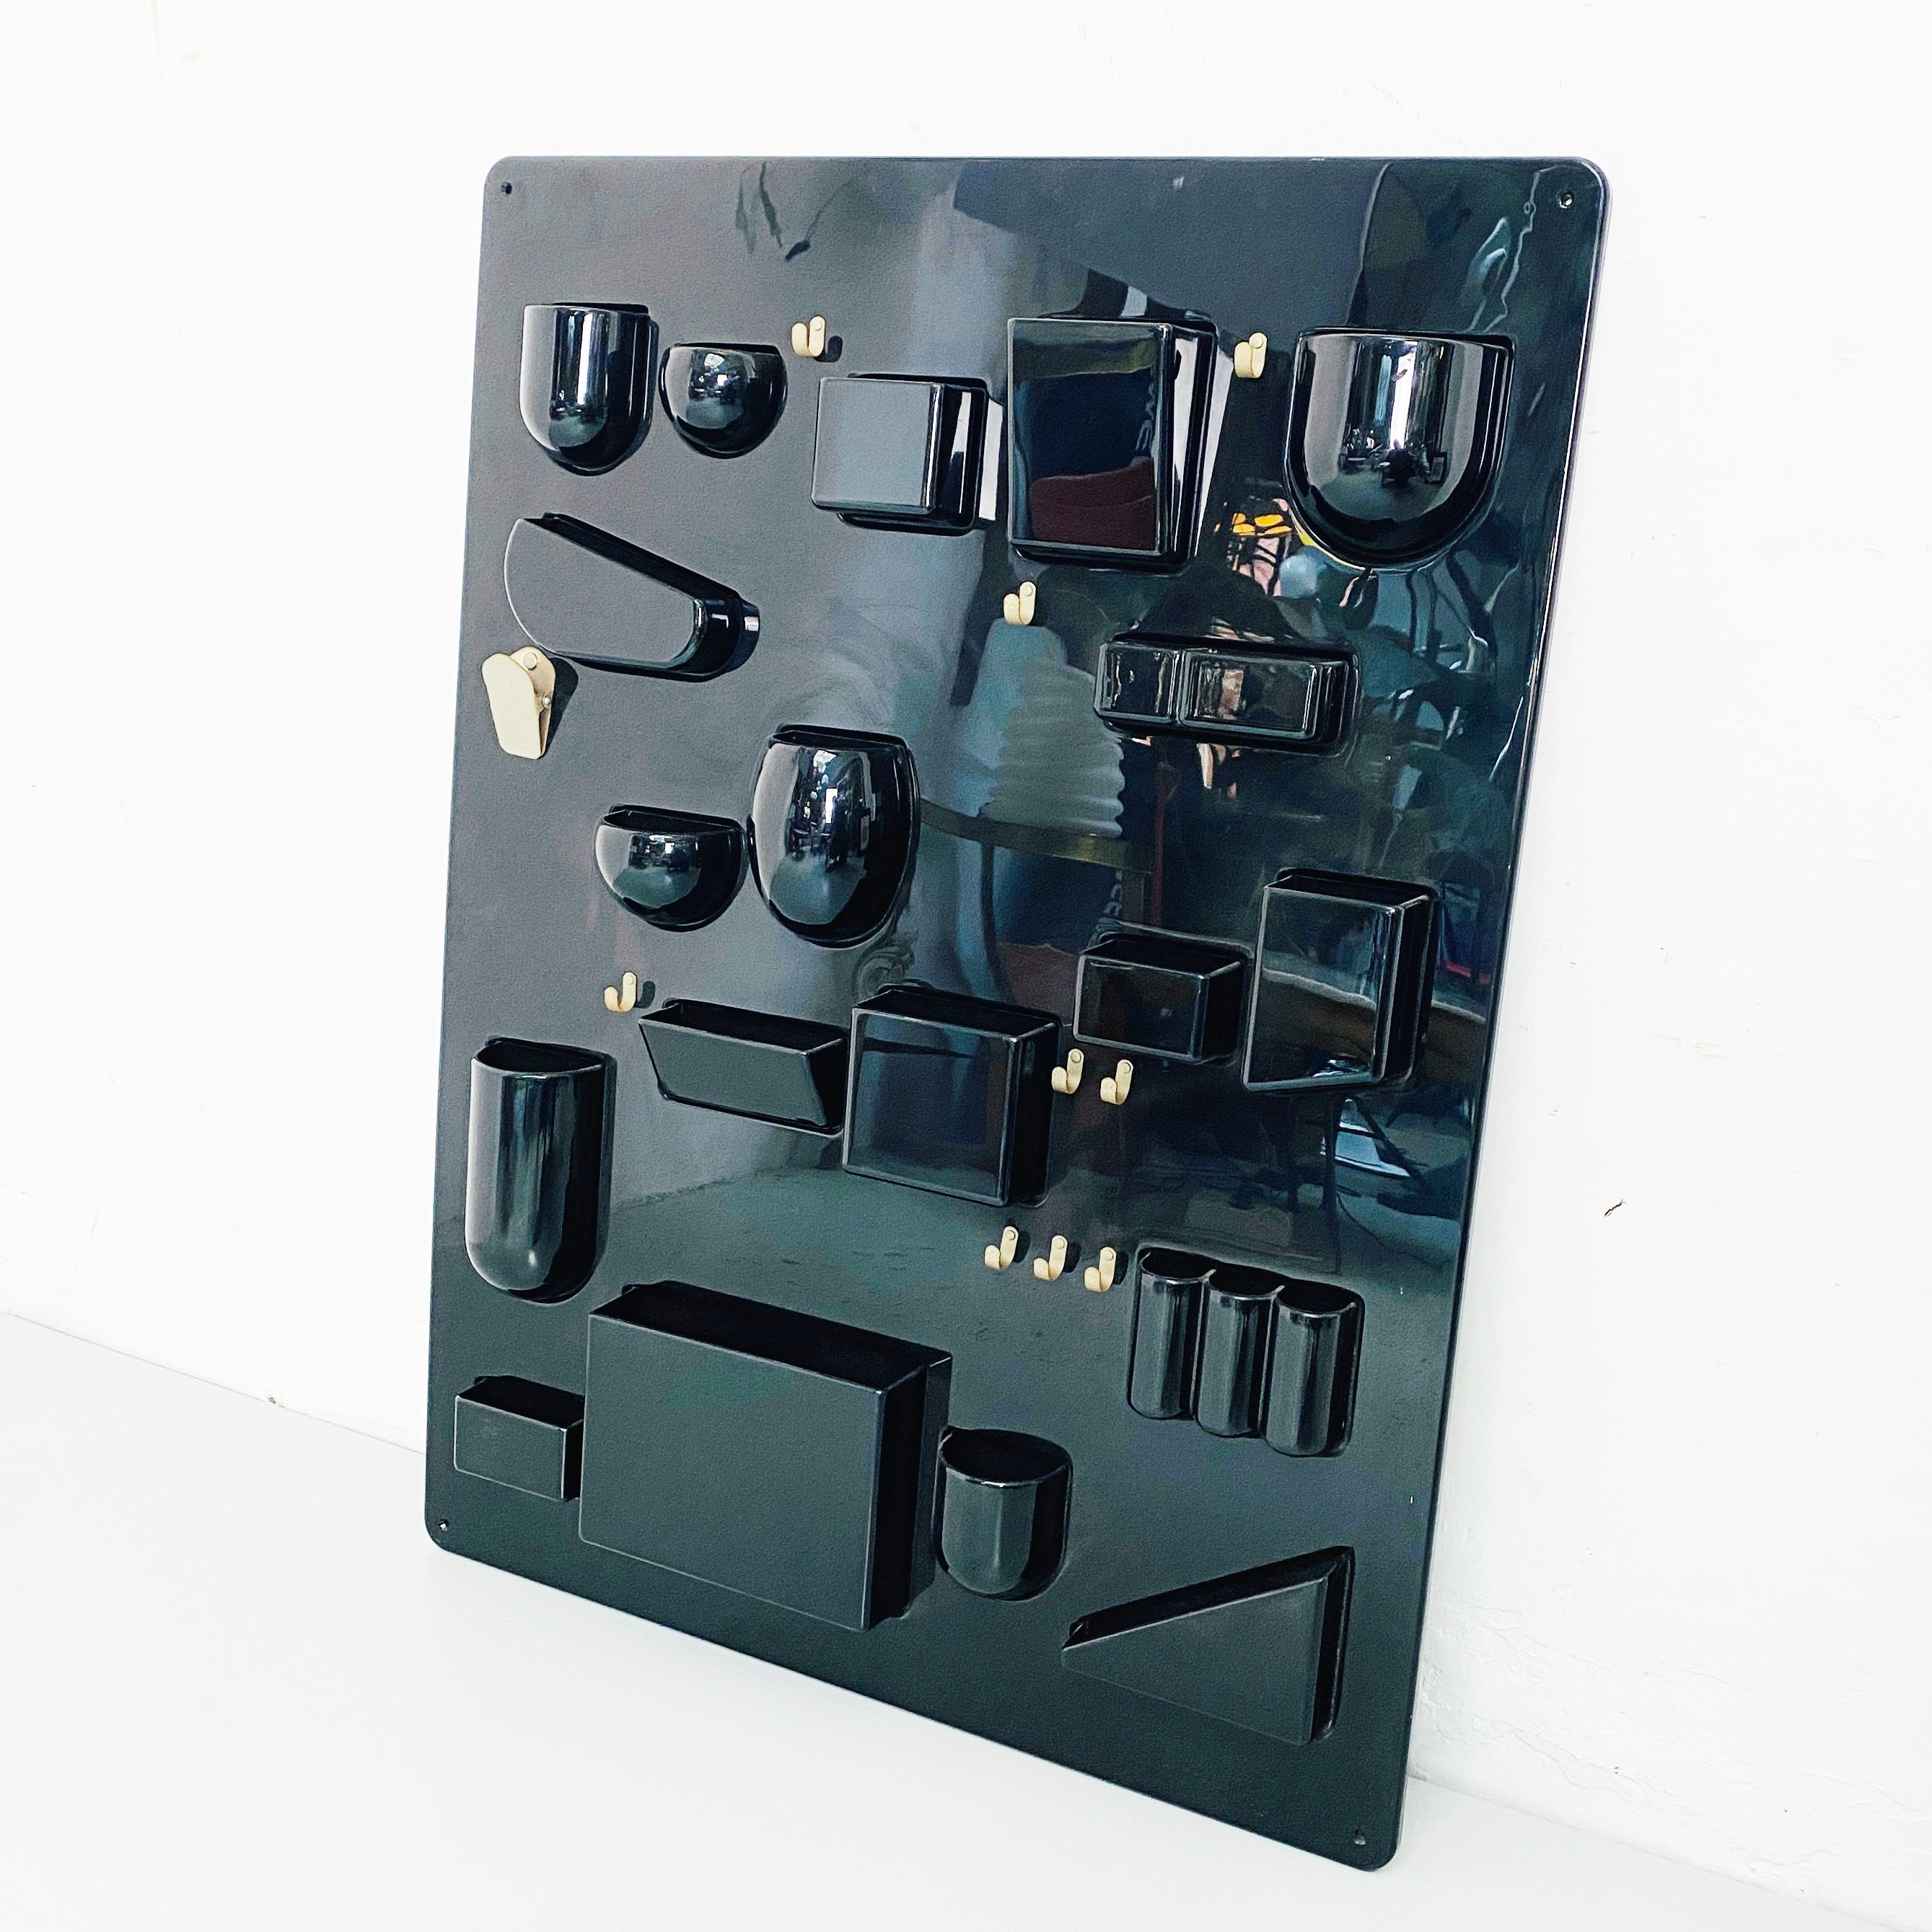 Black plastic wall object organizer designed by Dorothee Becker for Design M Ingo Maurer, 1969
Wall object holder in glossy black abs and hooks in nickel-plated metal, designed by Dorothee Becker and produced by Design M Ingo Maurer in 1969, still